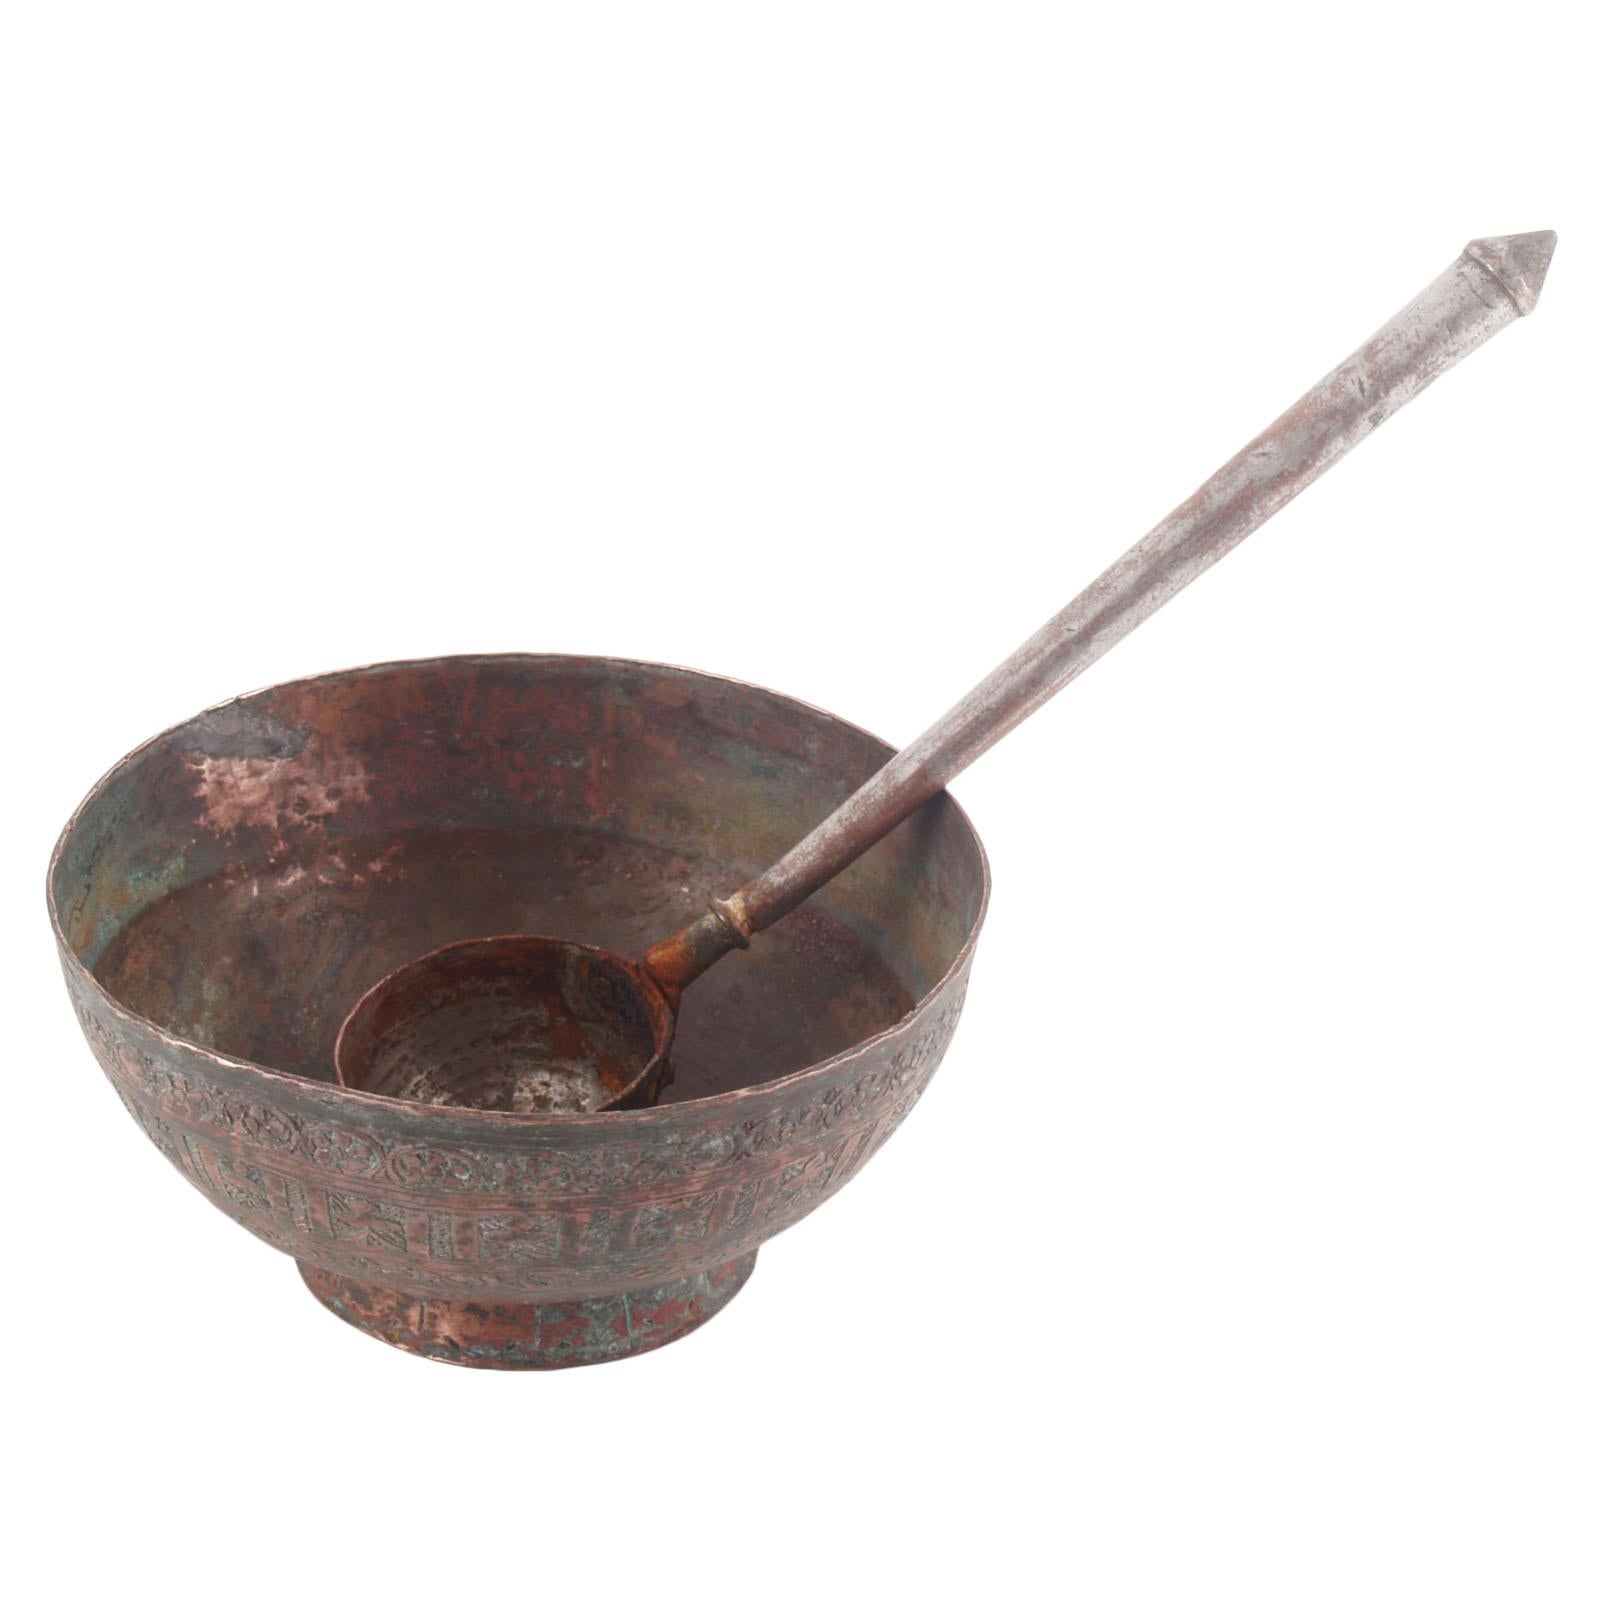 17th century heavy copper bowls with ladle covered with tin, handmade
fascinating, antique objects for collectors. The bowl is widely engraved by hand.